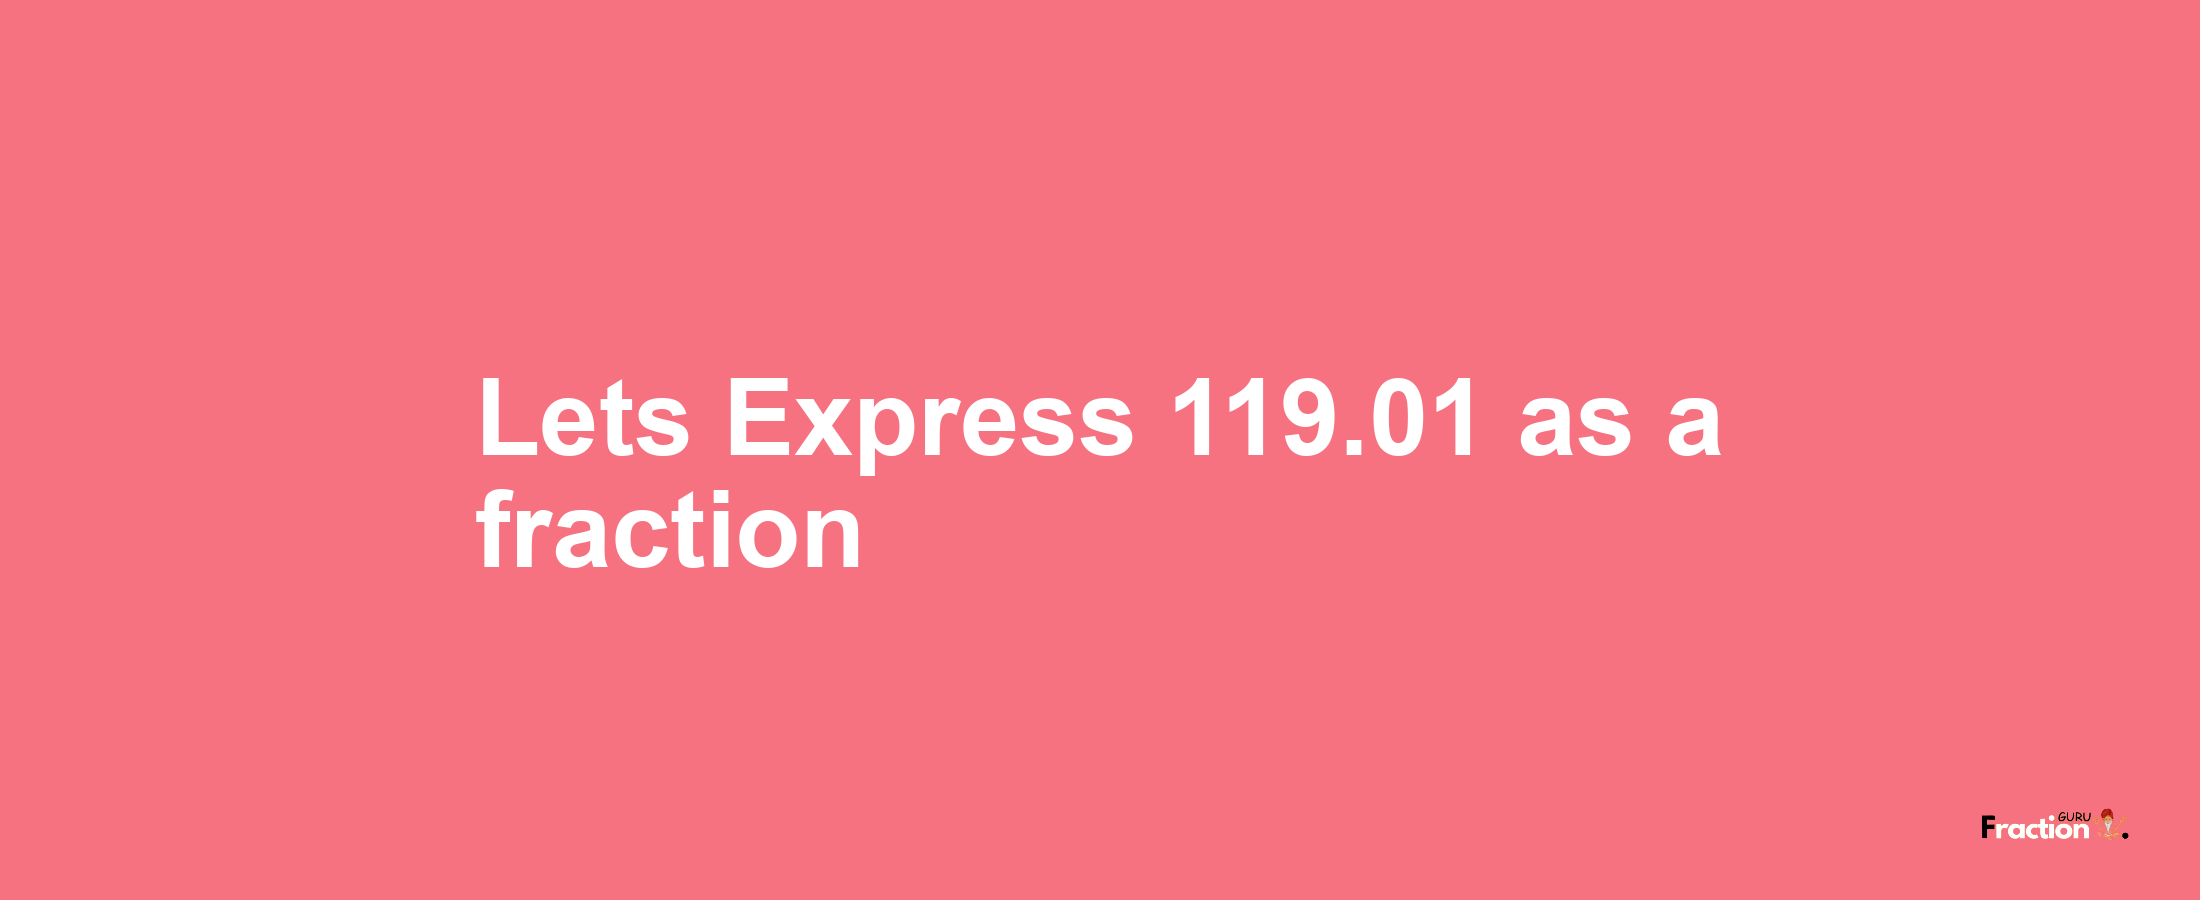 Lets Express 119.01 as afraction